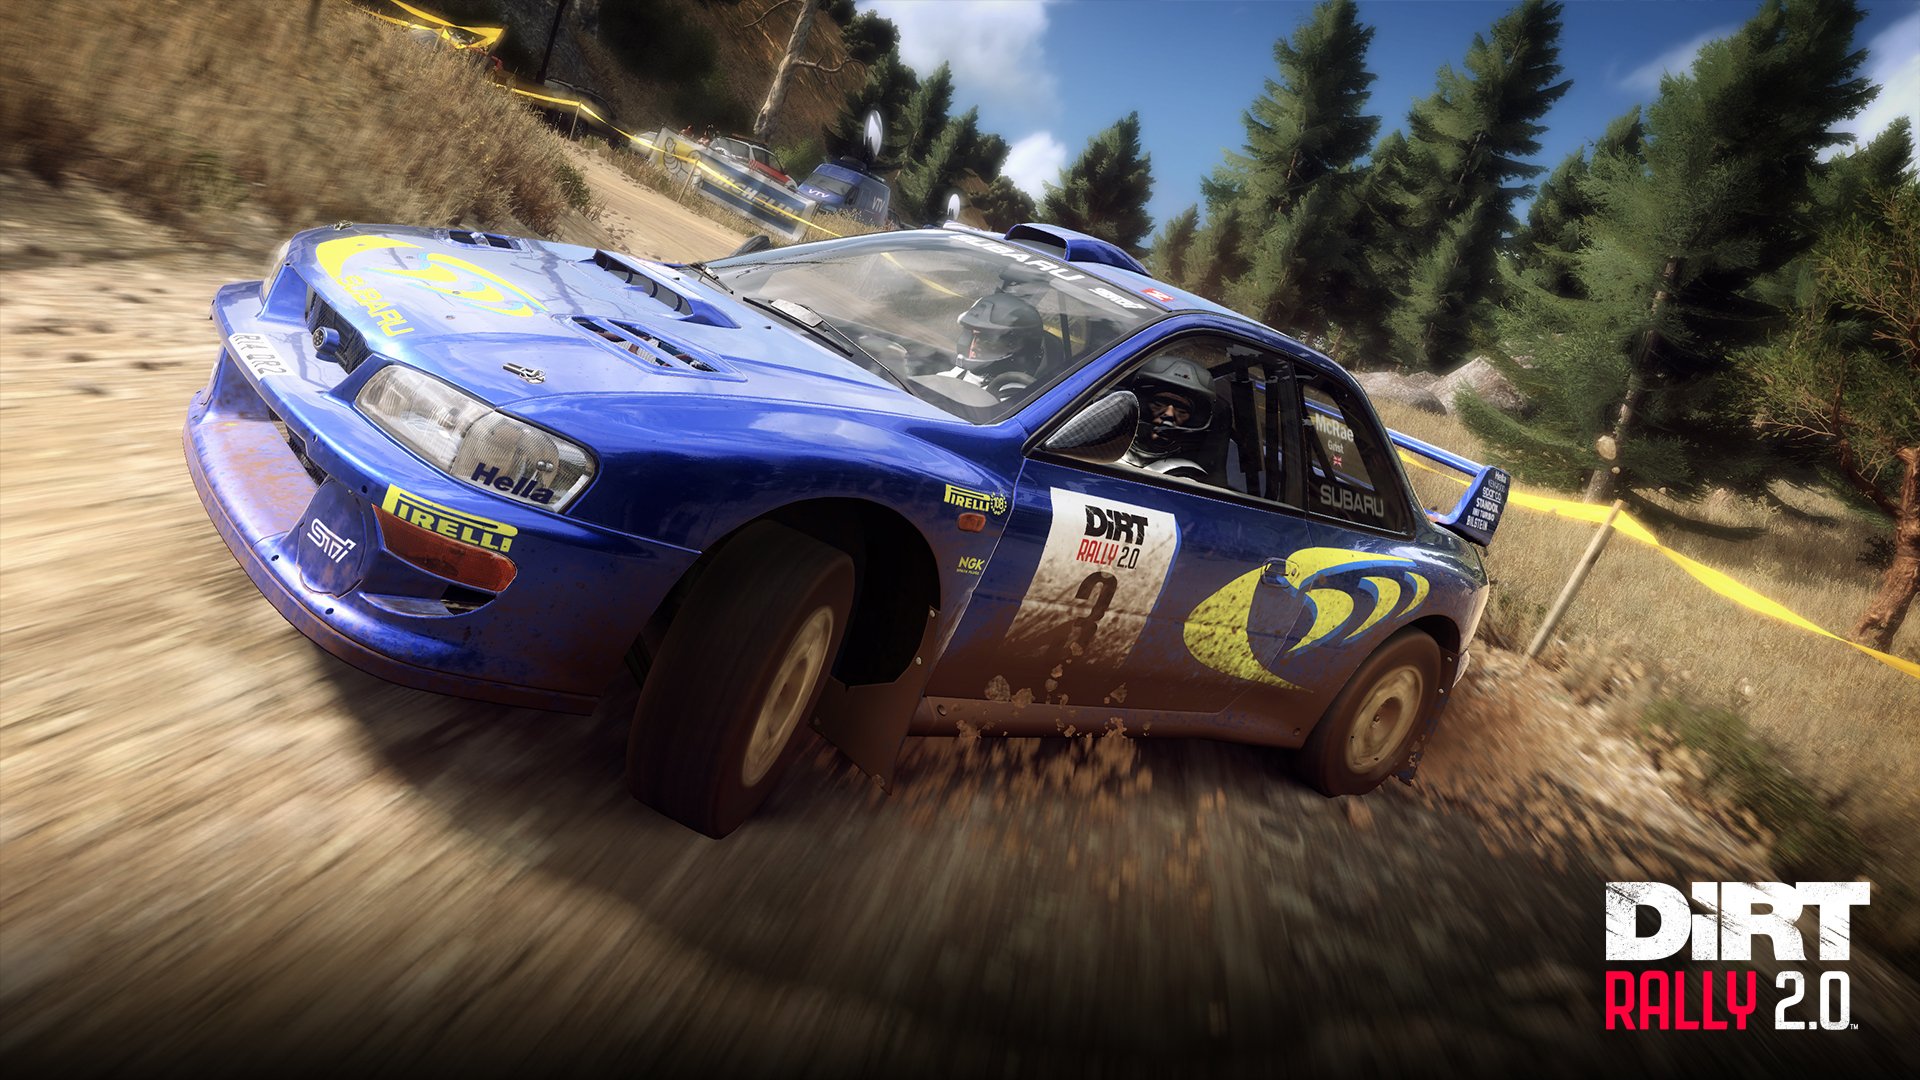 More information about "DiRT Rally 2.0: patch 1.13 e DLC Flat Out disponibili"